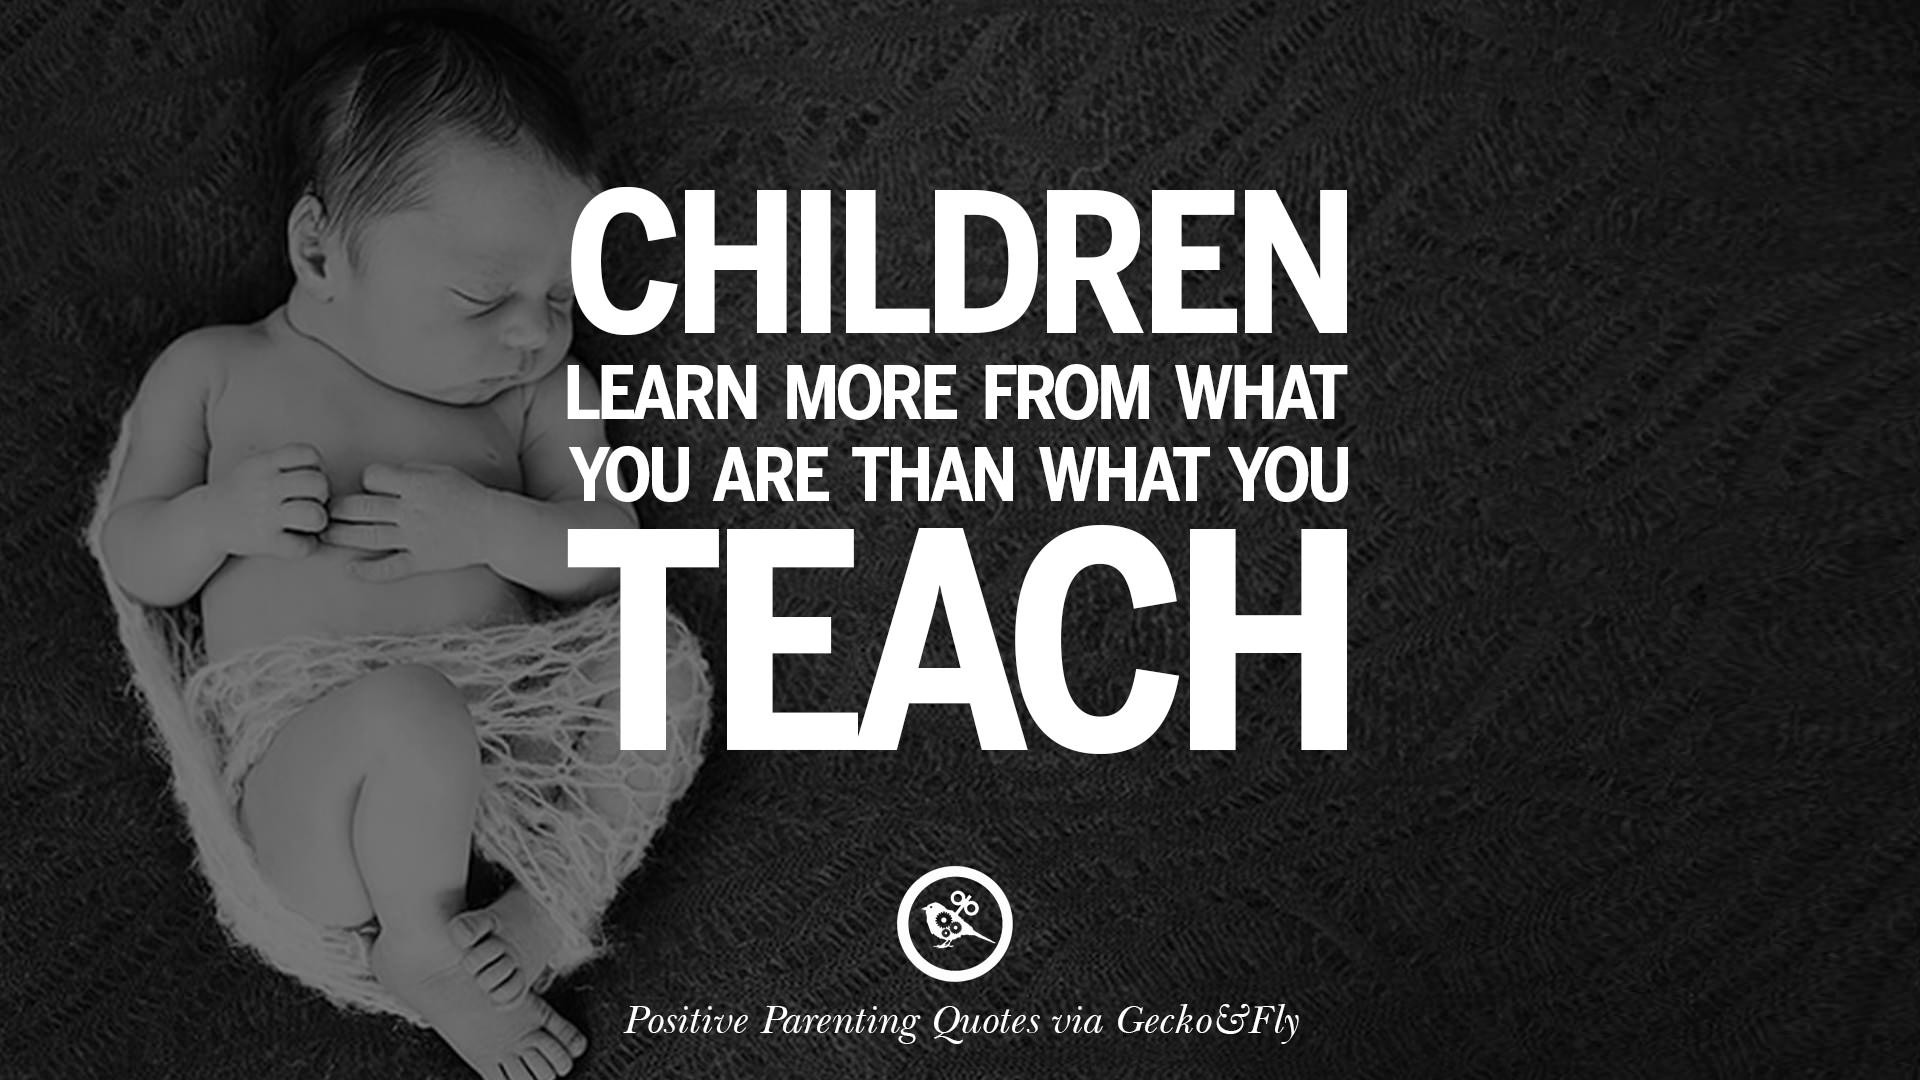 Quotes About Children
 20 Positive Parenting Quotes Raising Children And Be A